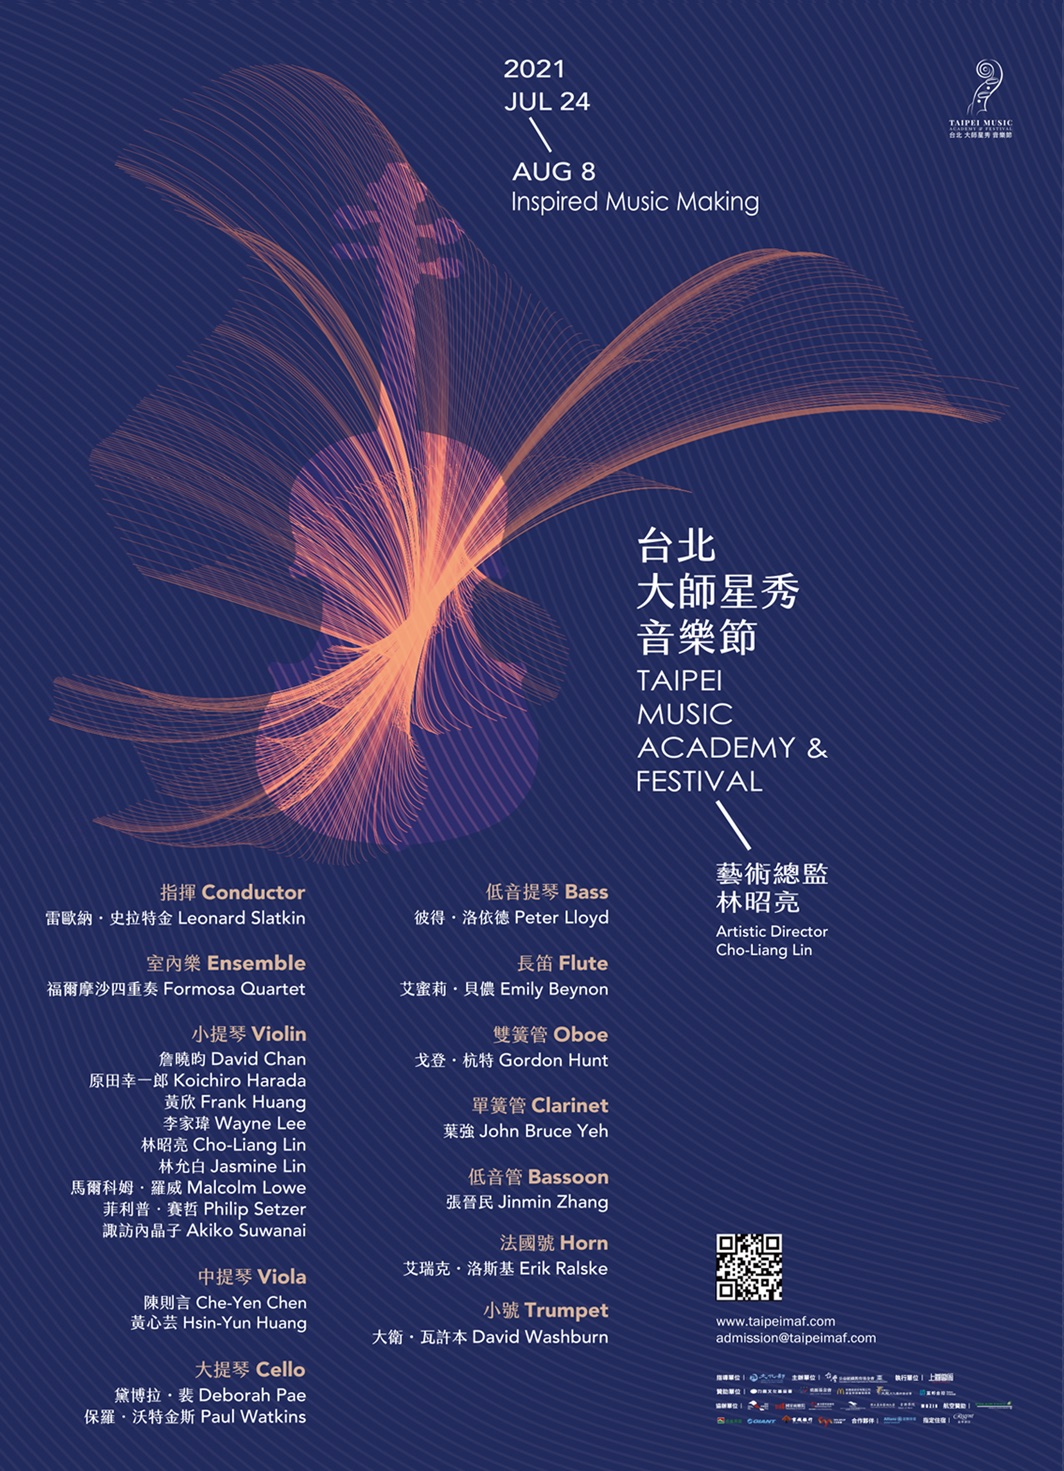 MUSE Design Winners - KEY VISUAL DESIGN POSTER FOR MUSICIAN CHO-LIANG, LIN